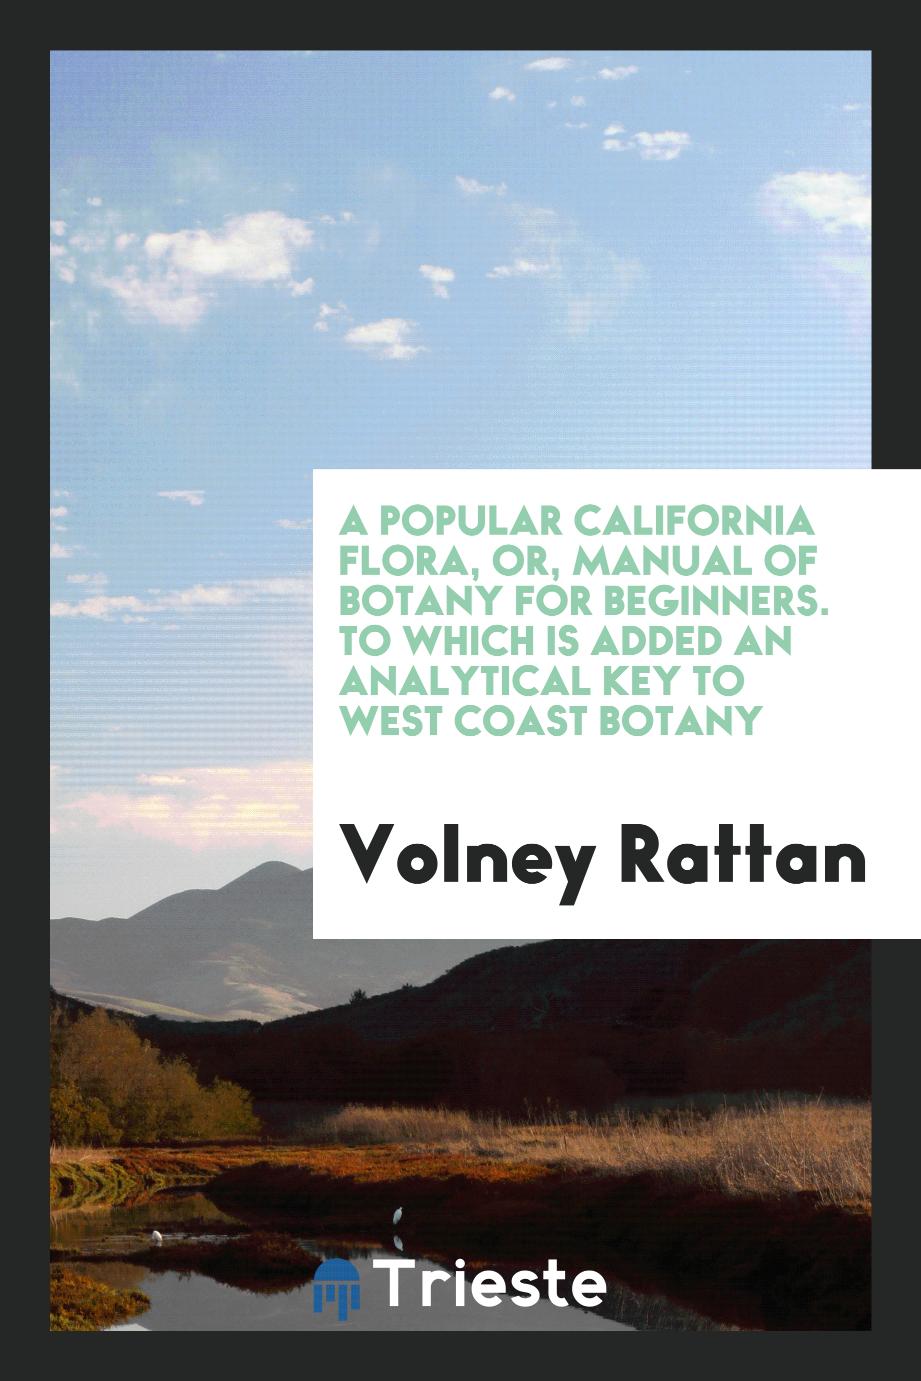 A popular California flora, or, manual of botany for beginners. To which is added an analytical key to West Coast botany